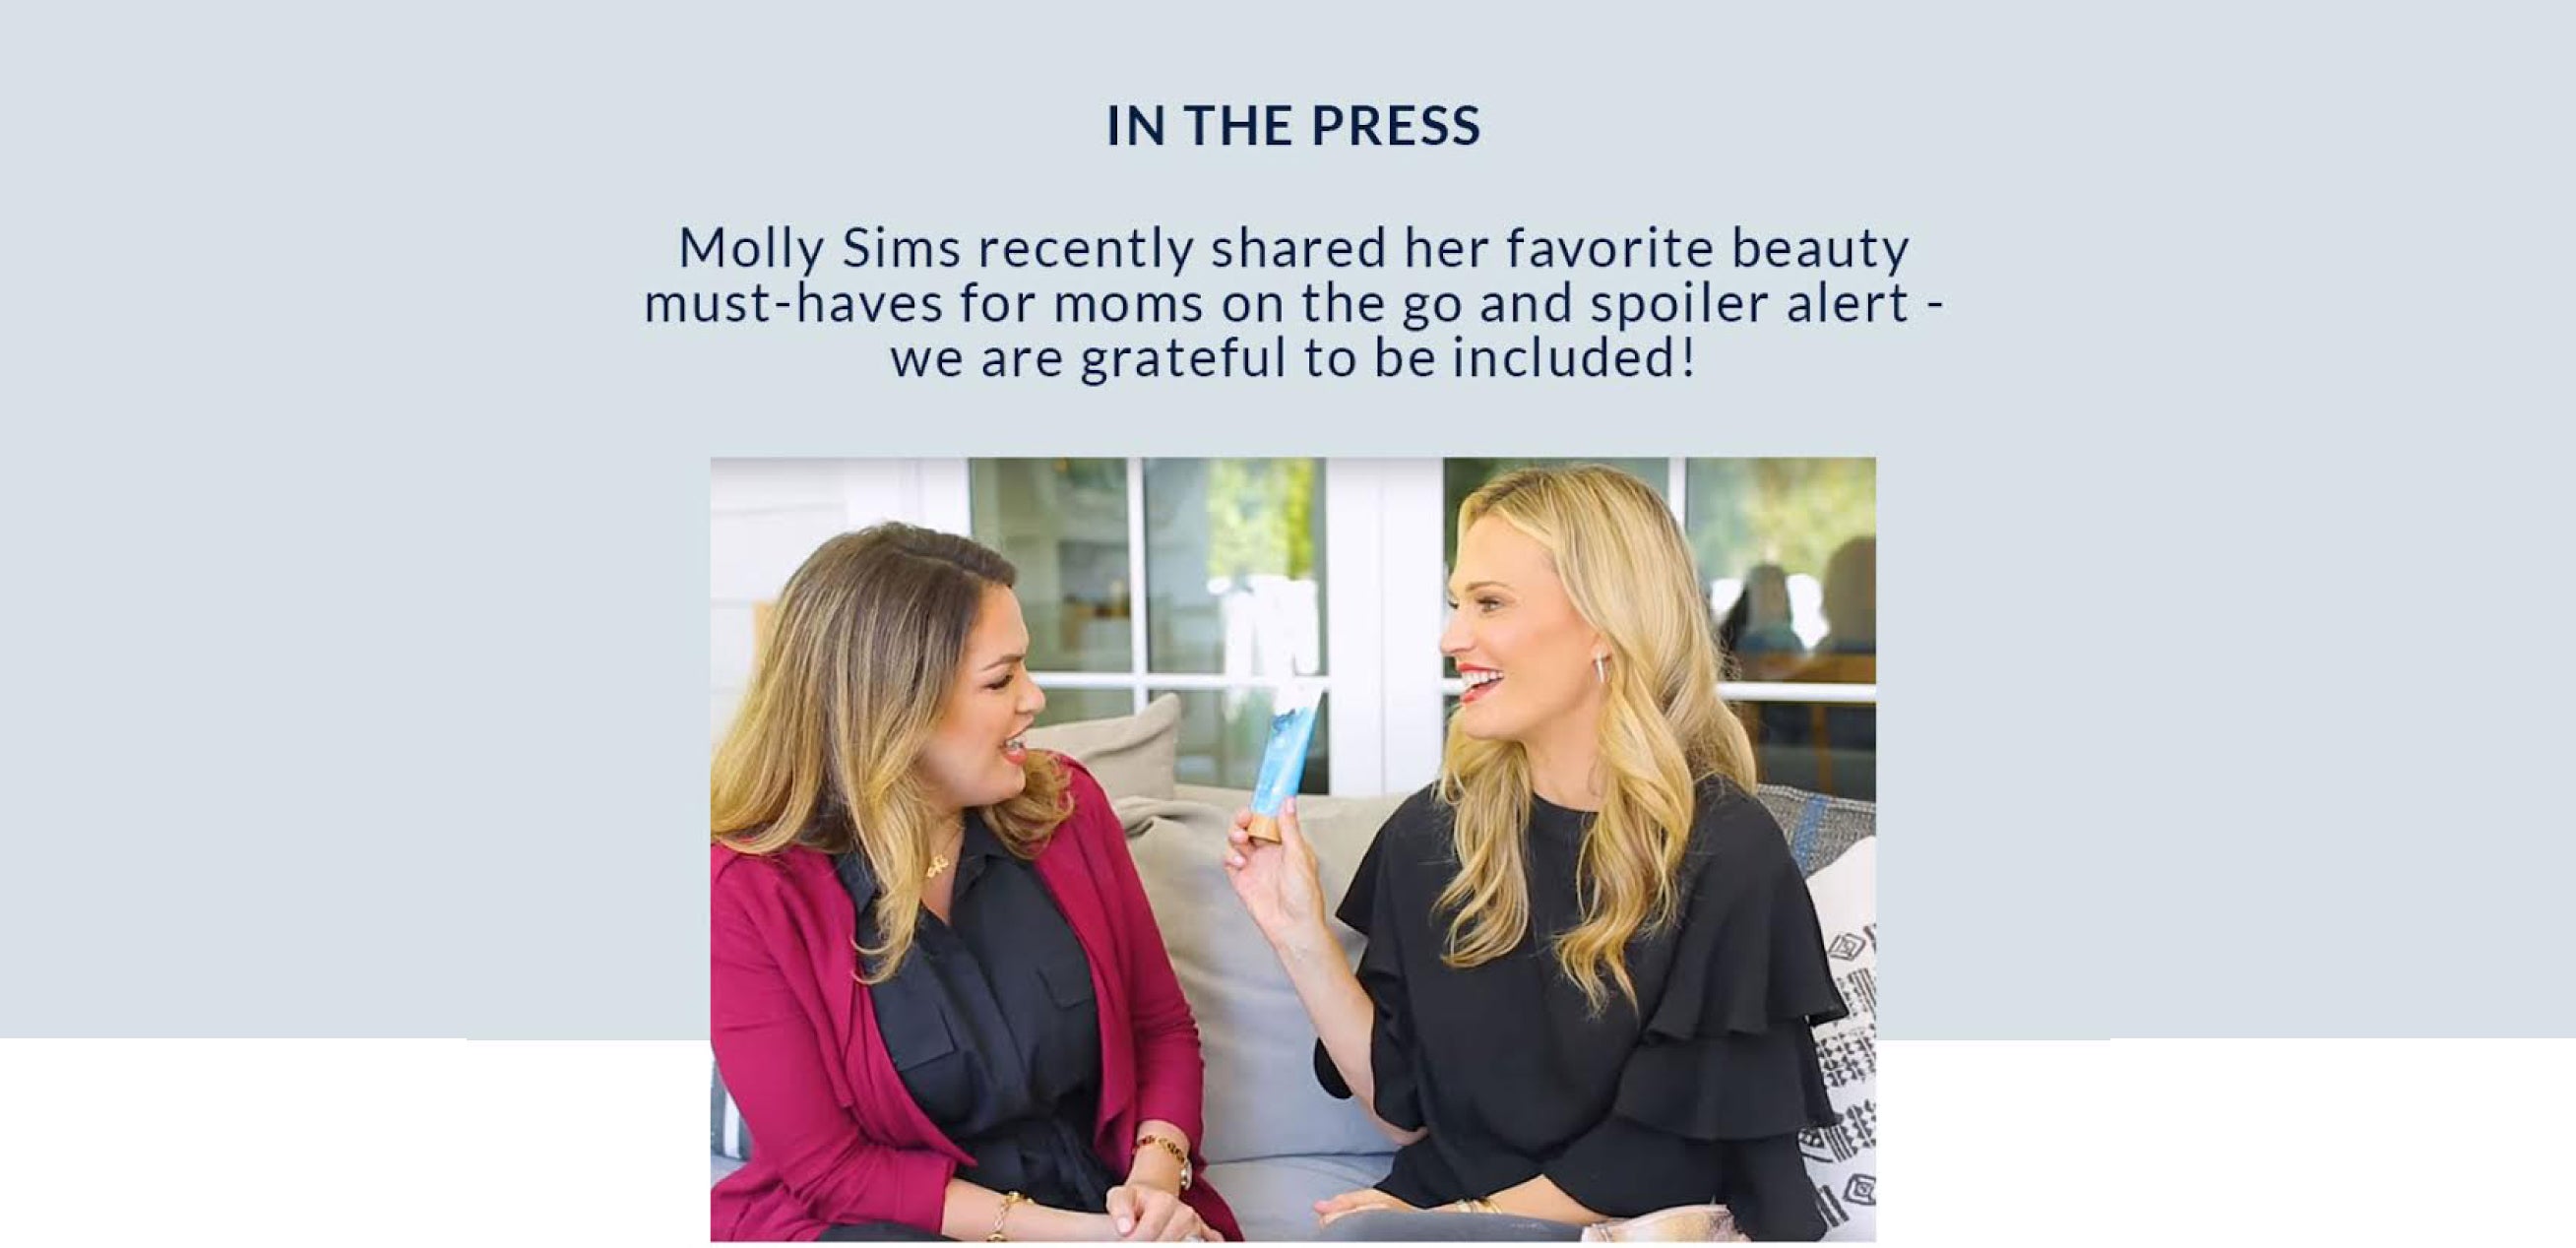 Molly Sims Shares Conscious Coconut Oil as her beauty must-have for moms